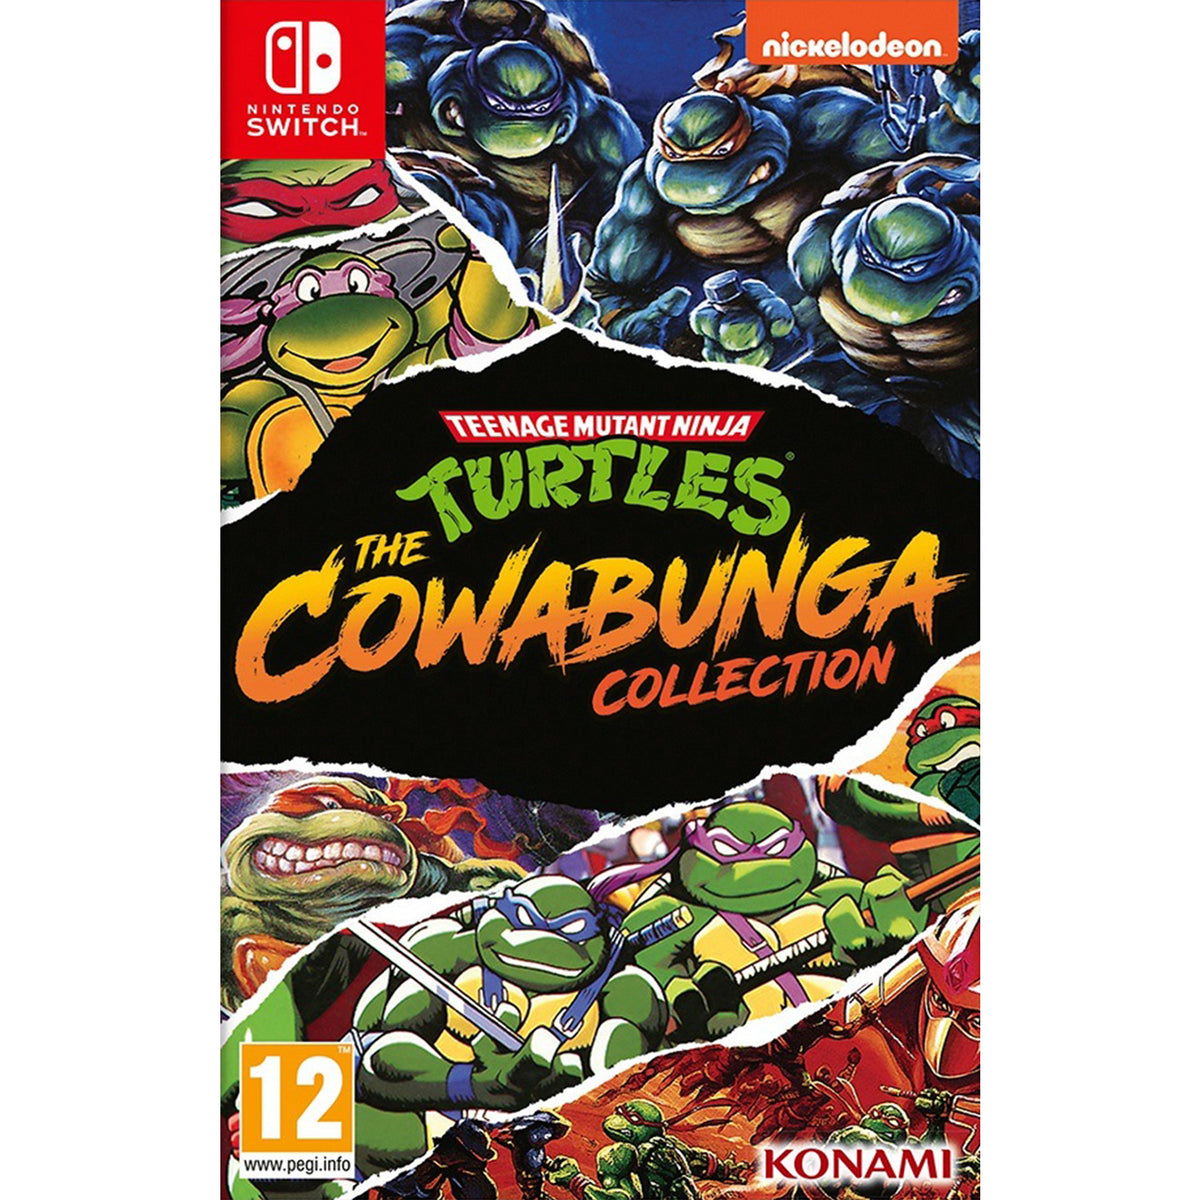 Switch Go\'s Turtles: – Deal Entertainment Collection Of Mutant - Day! Cowabunga Teenage The Ninja The